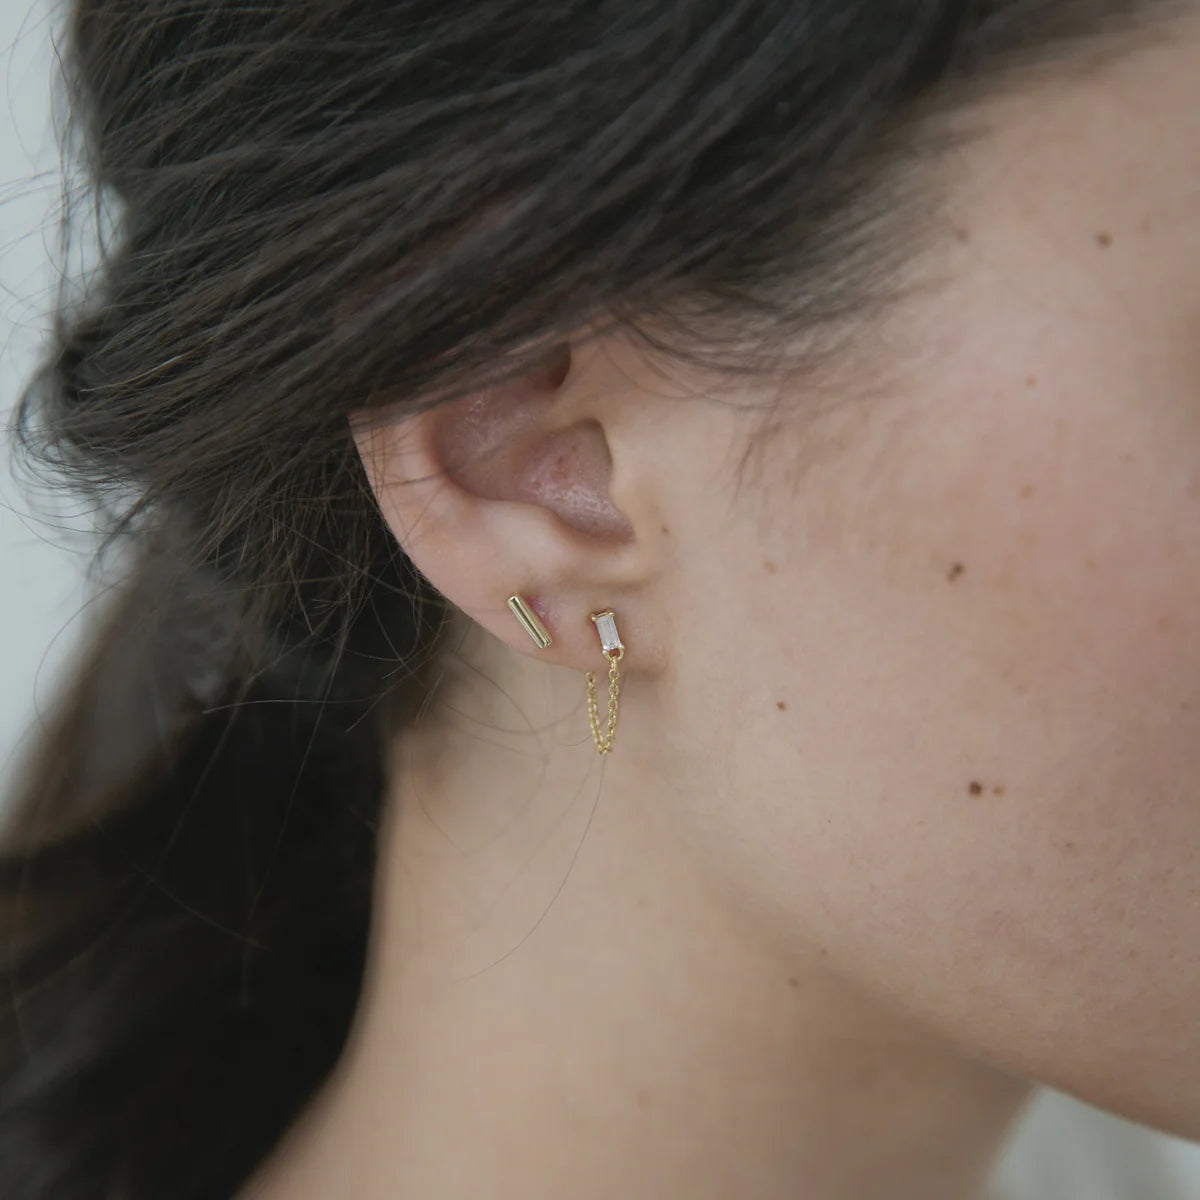 You Rock Chain Studs - Gold